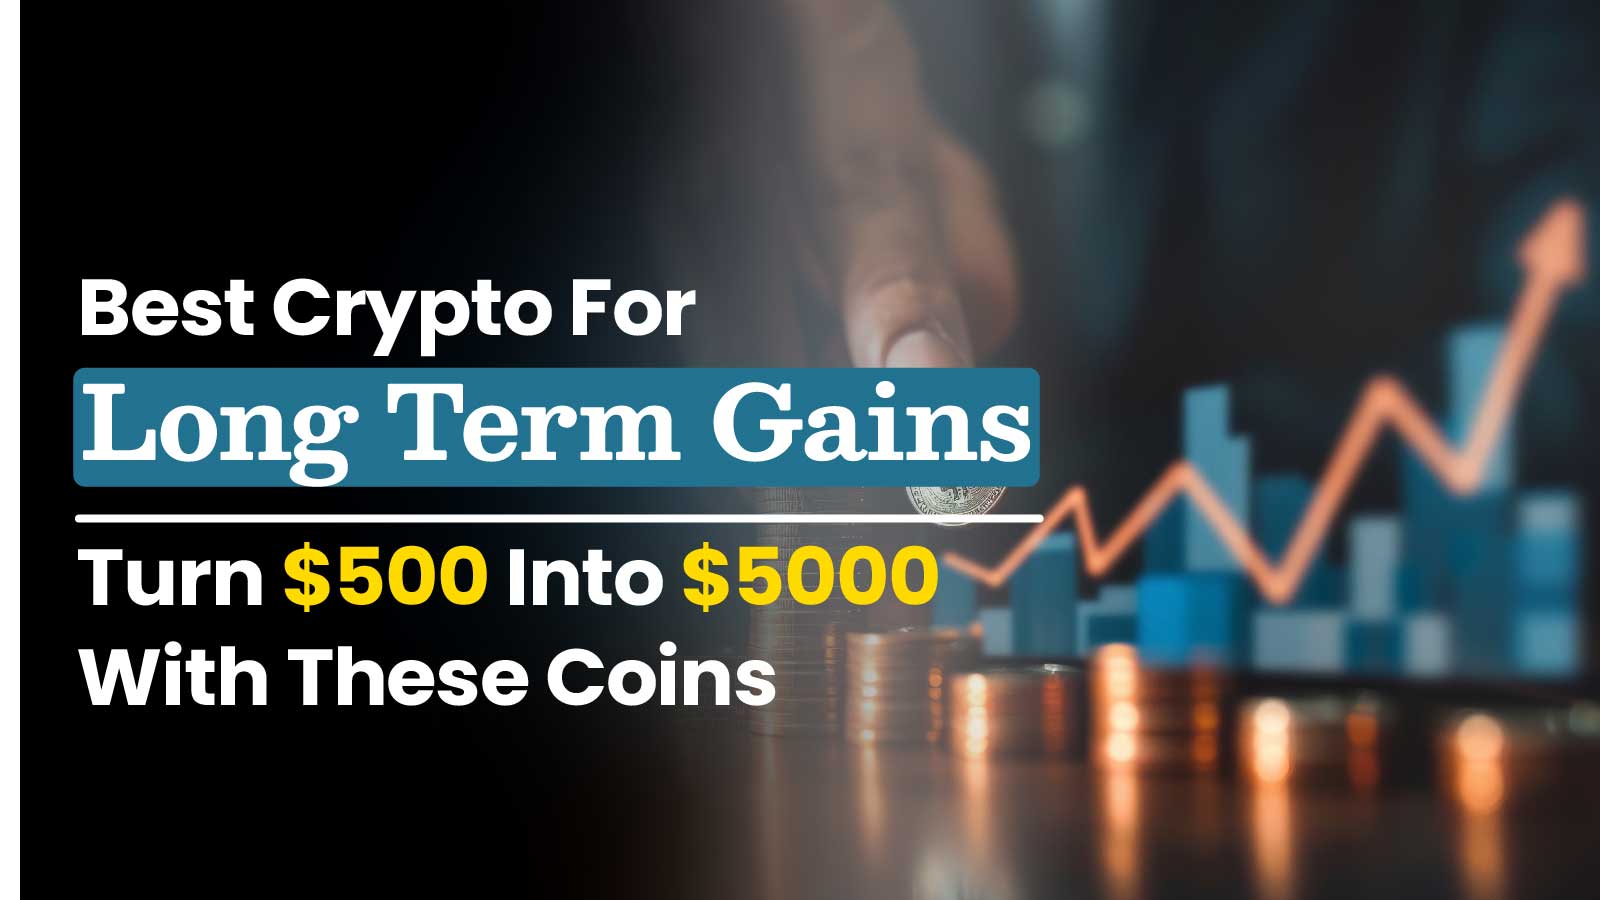 Best Crypto for Long-Term Gains: Turn $500 into $5000 with These Coins